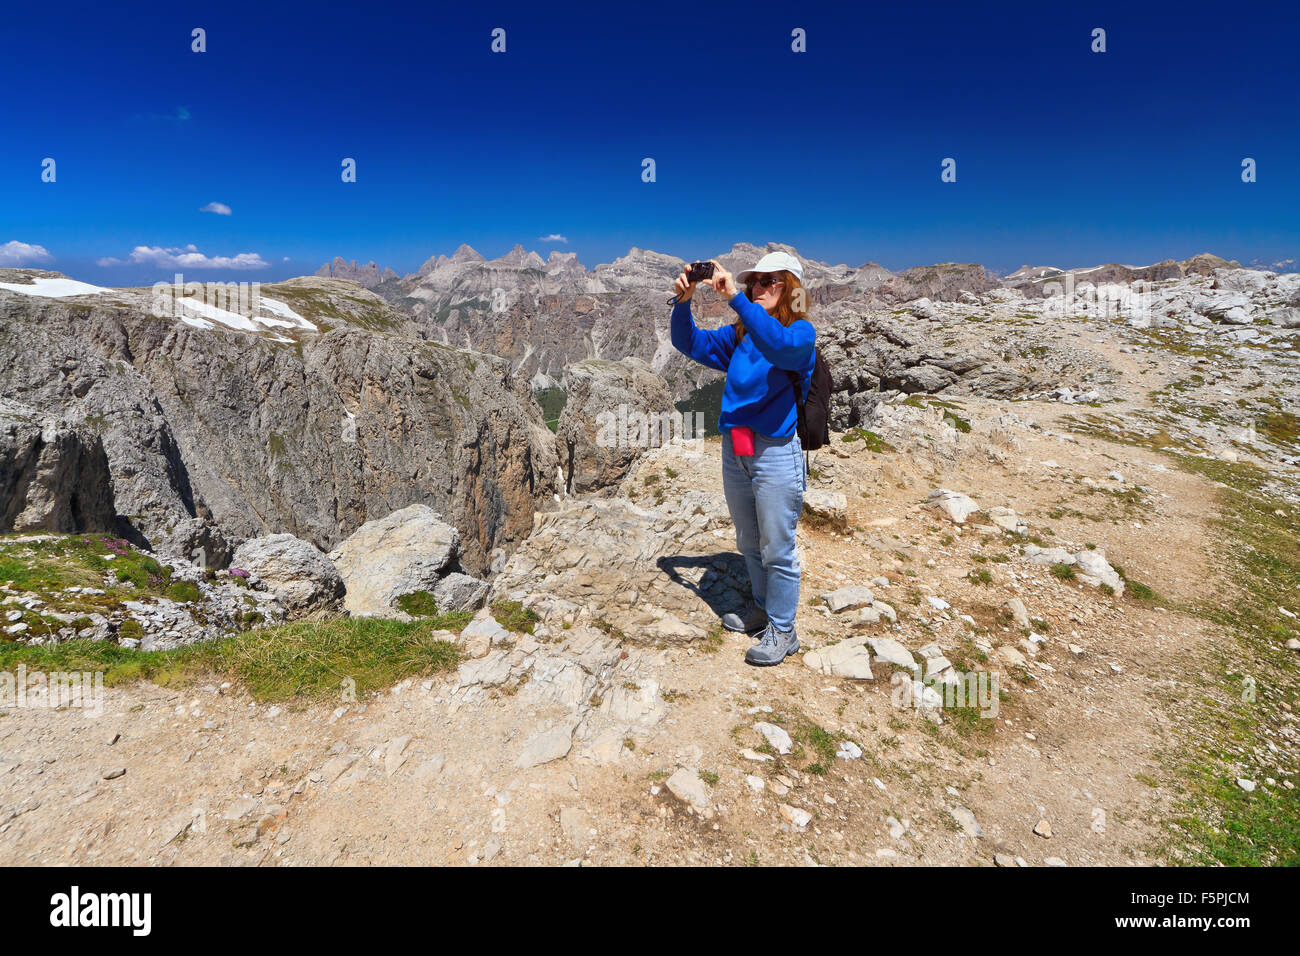 hiker take a picture from a scenic spot in Sella mount, Italian Dolomites Stock Photo